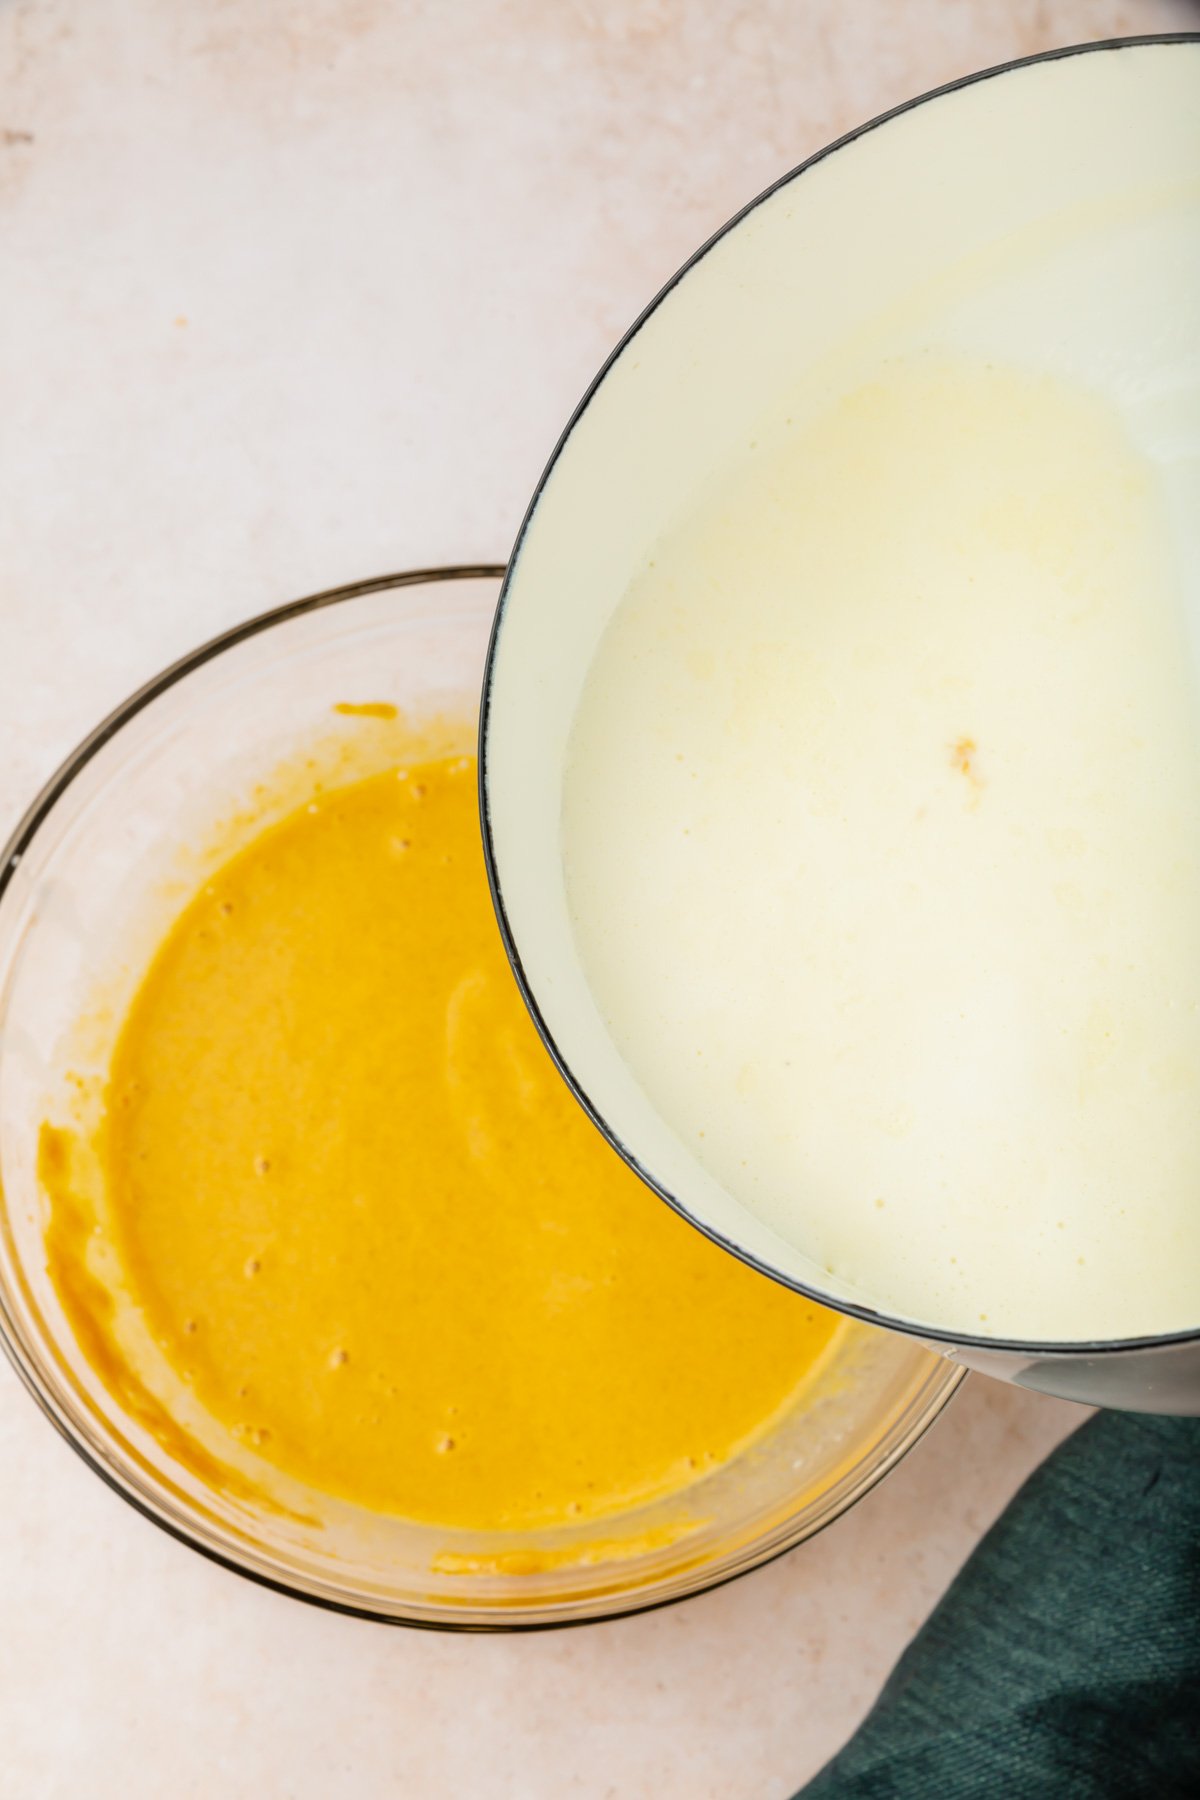 Heavy cream being poured from a white saucepan into a pumpkin and egg yolk mixture to make creme brulee.